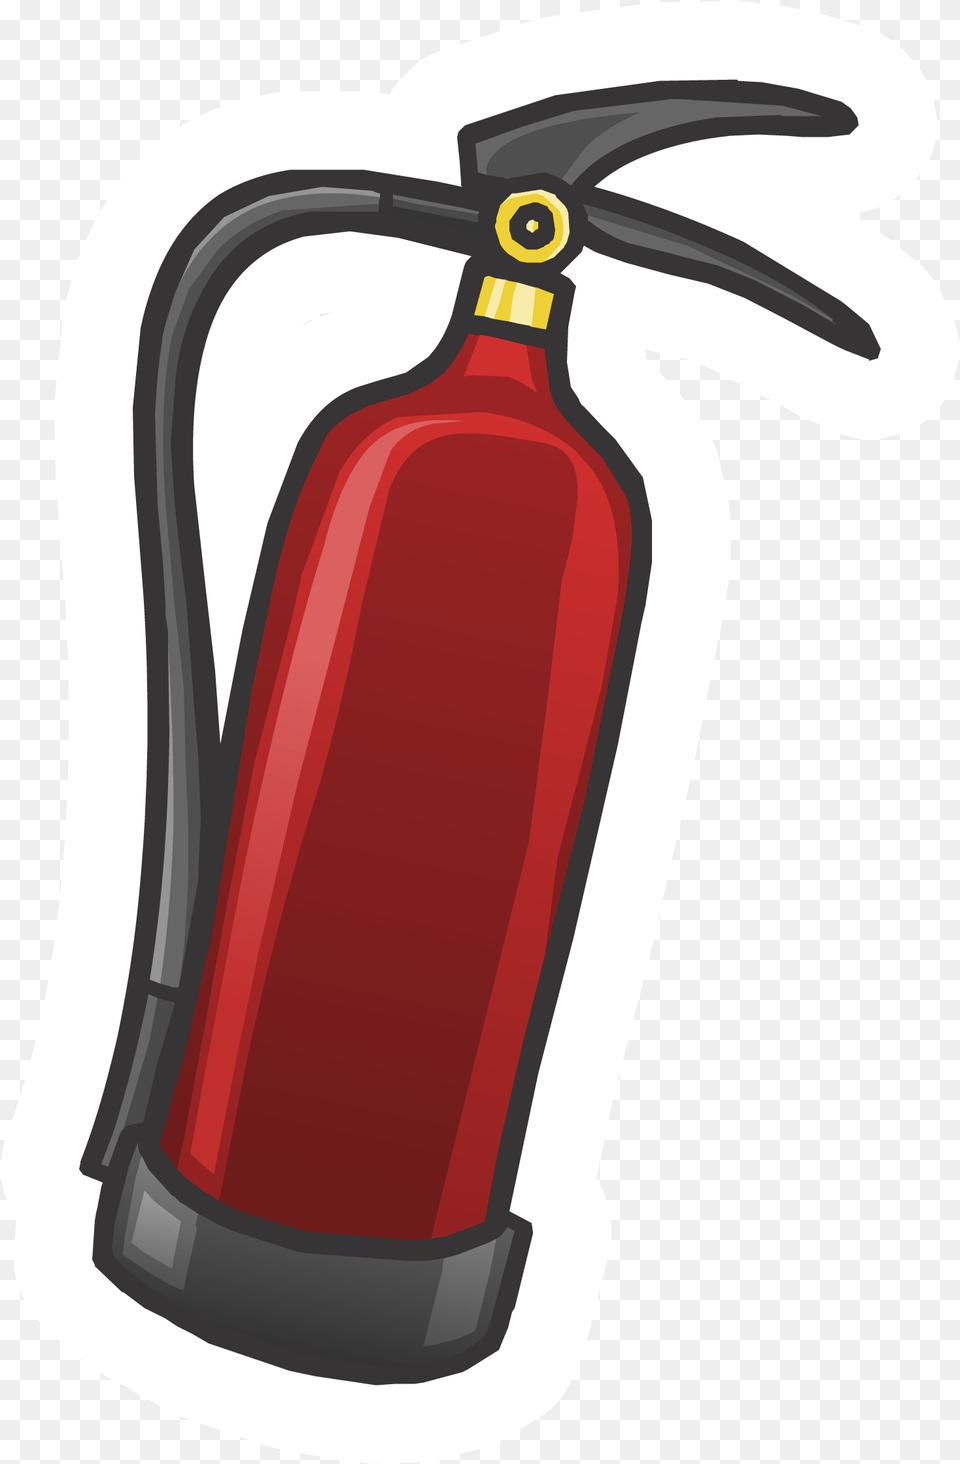 Paintbrush Clipart Pictures 2 Clipartbarn Fire Extinguisher Cartoon, Smoke Pipe Free Png